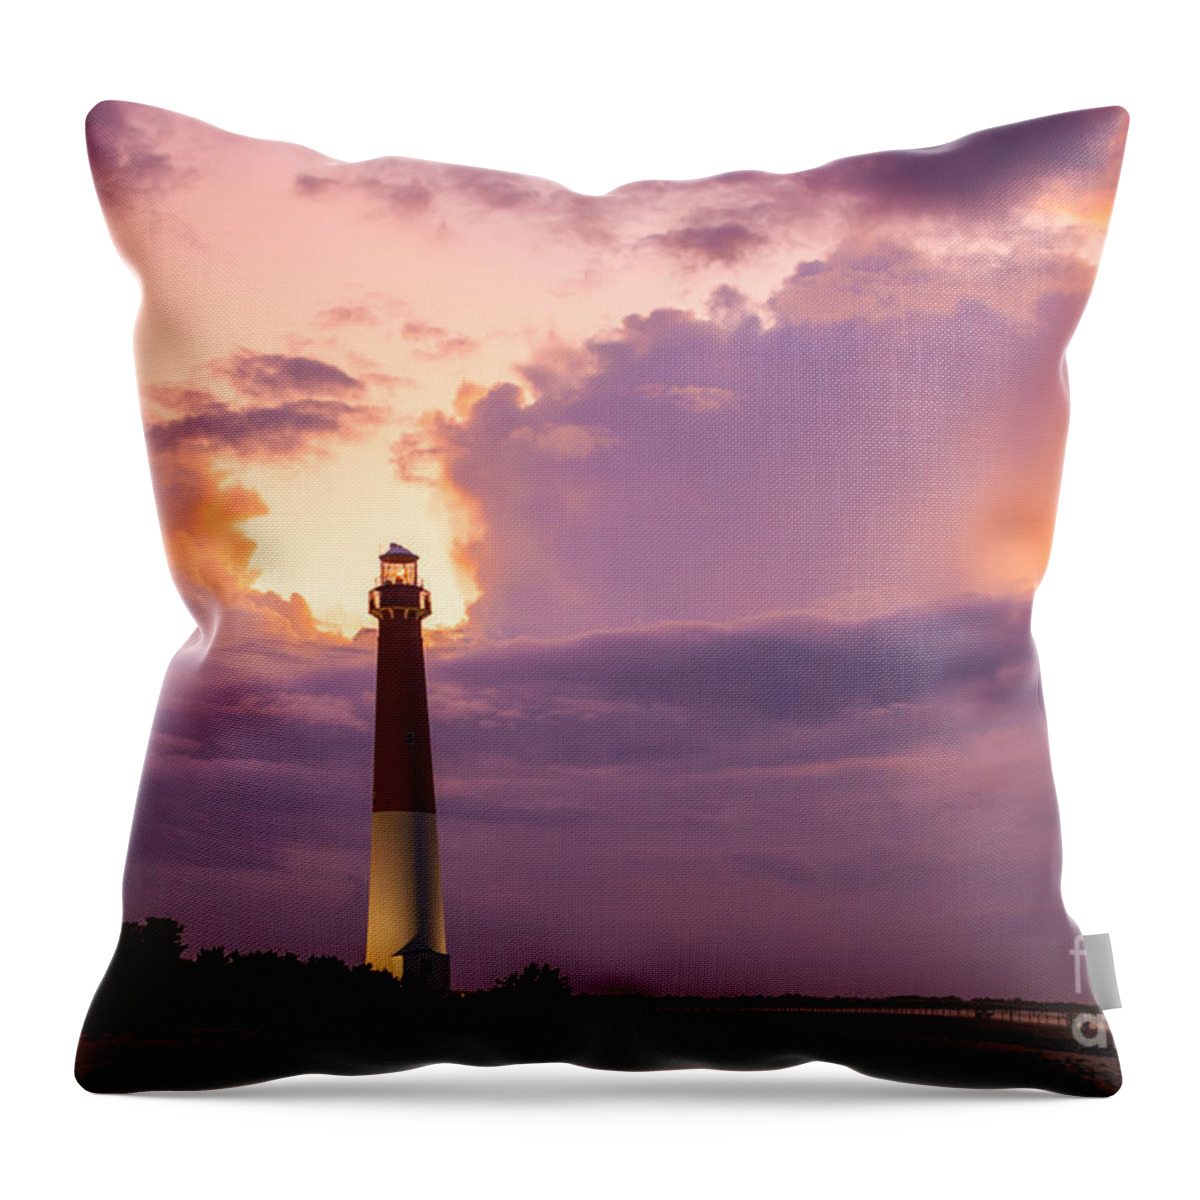 Barnegat Lighthouse Throw Pillow featuring the photograph Barnegat Lighthouse Stormy Sunset by Michael Ver Sprill